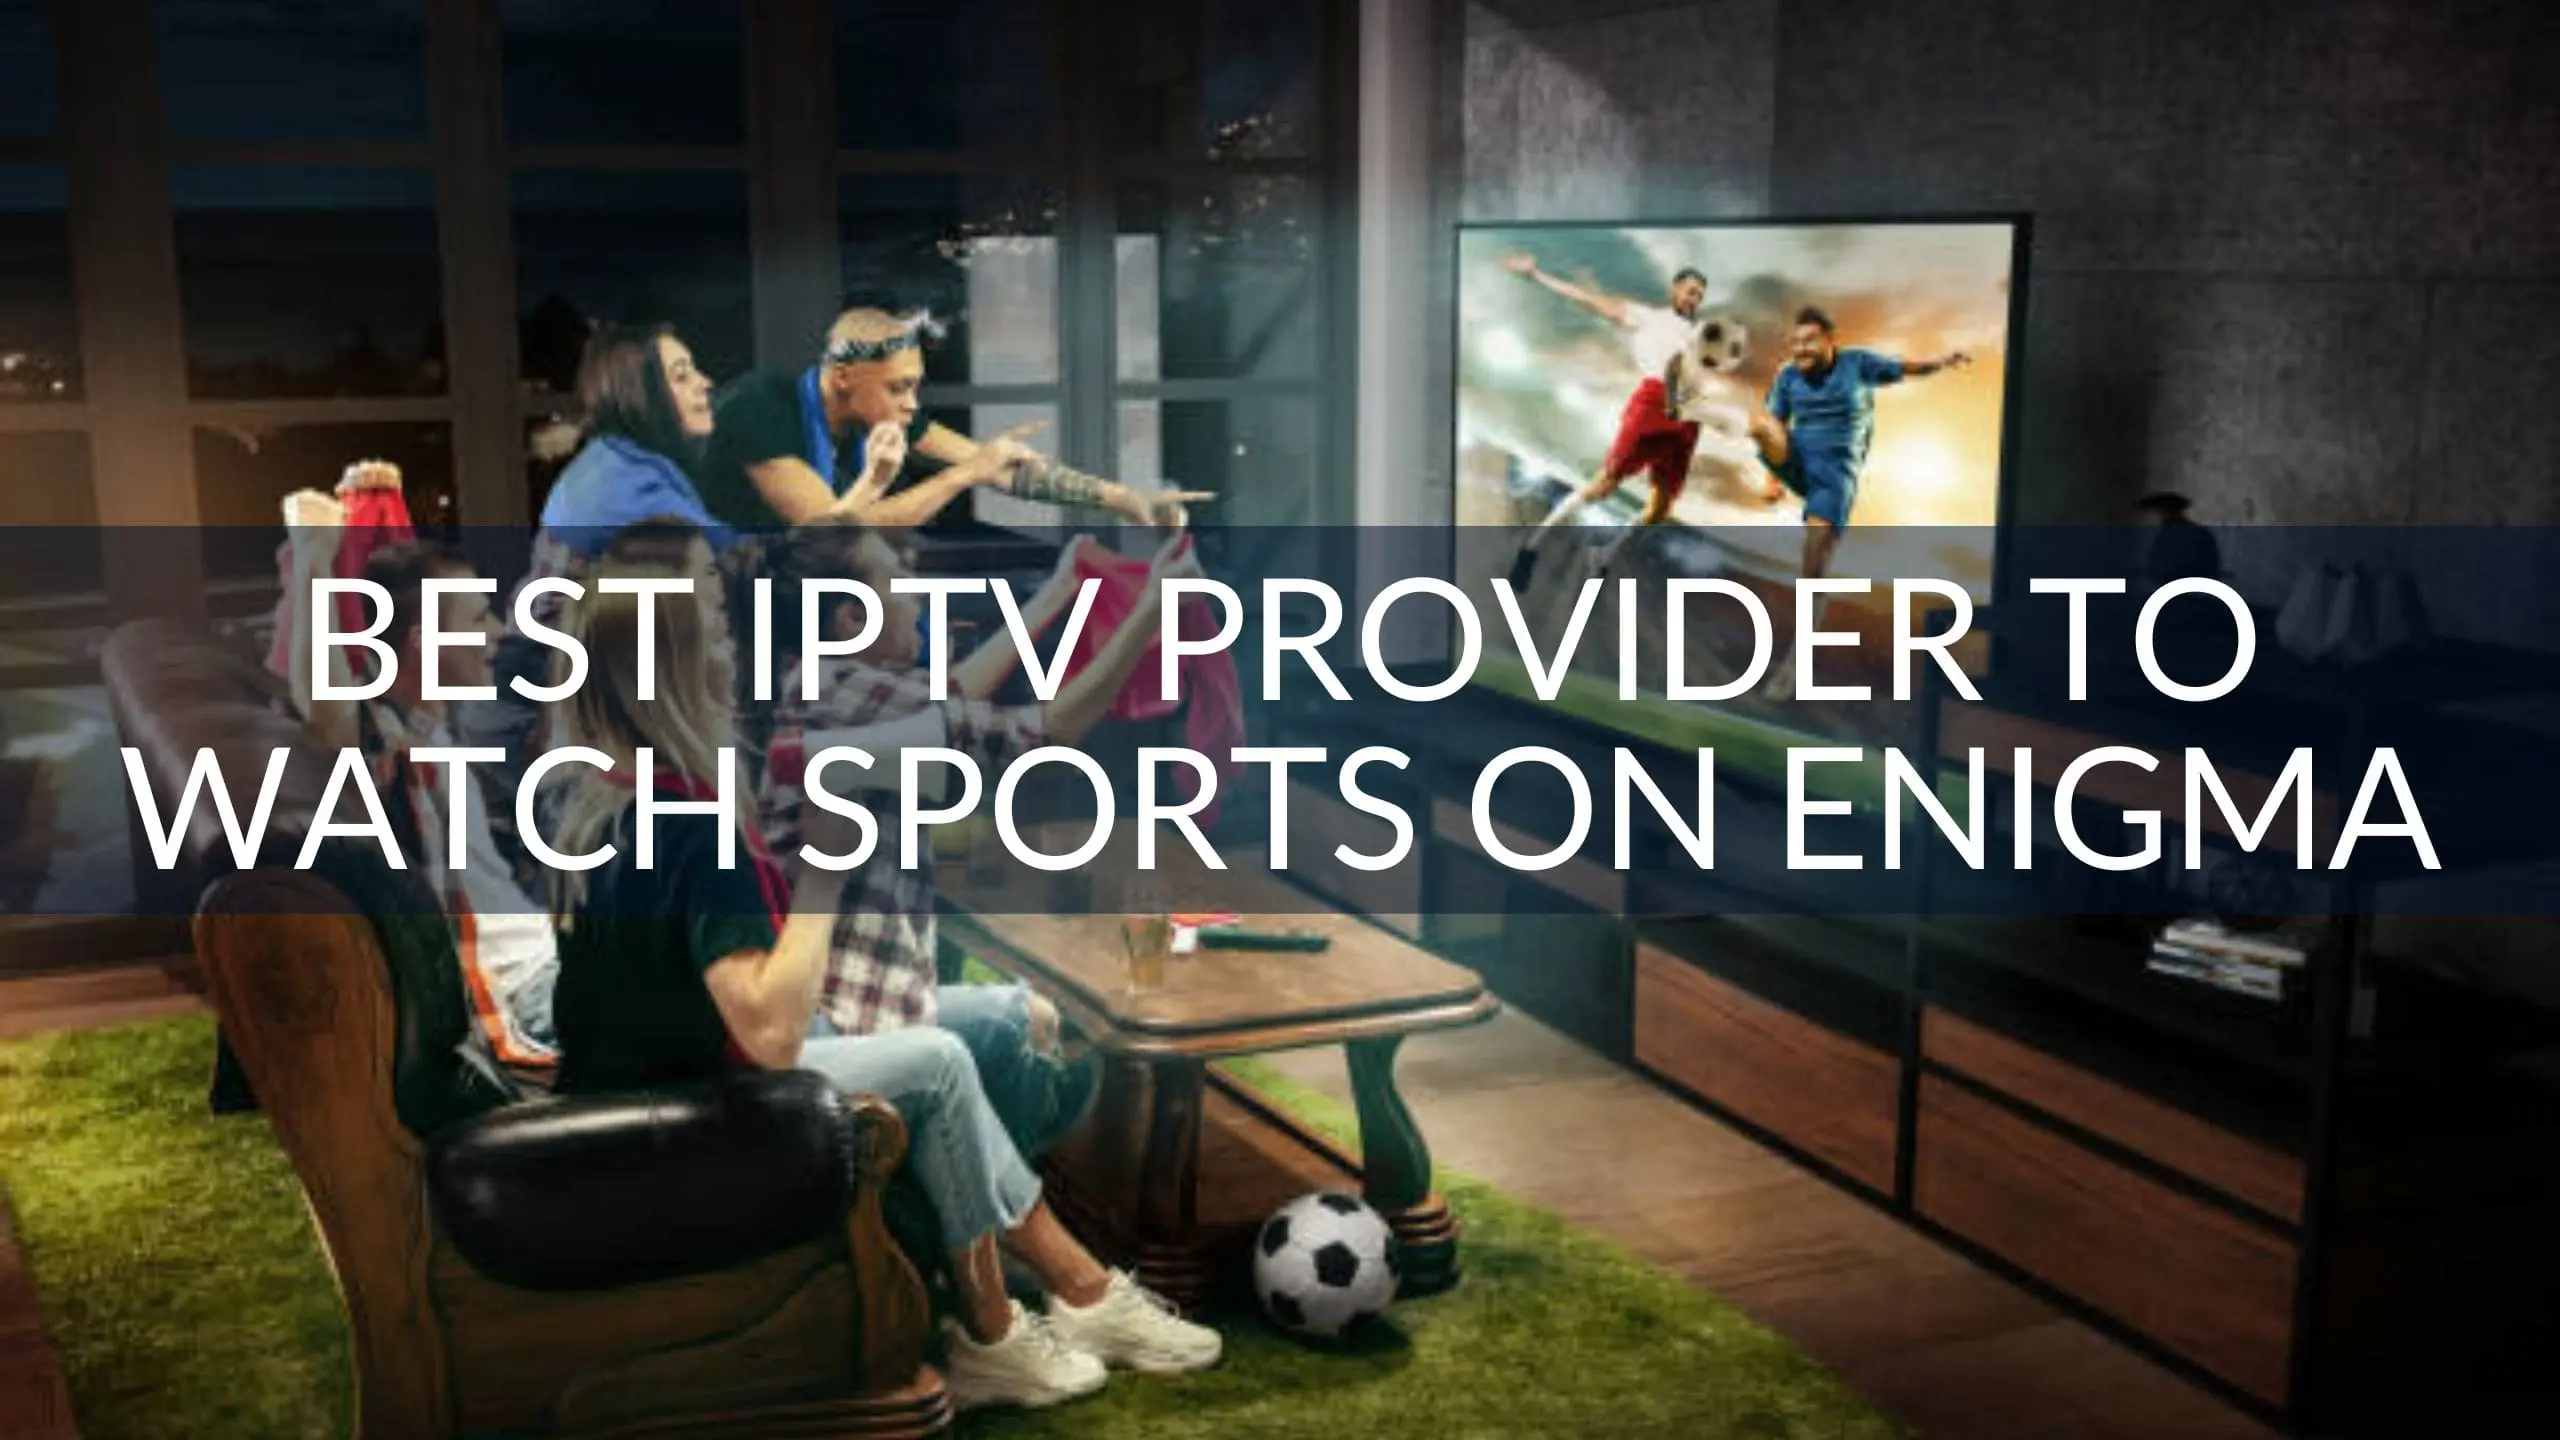 Best IPTV Provider to Watch Sports on Enigma 2